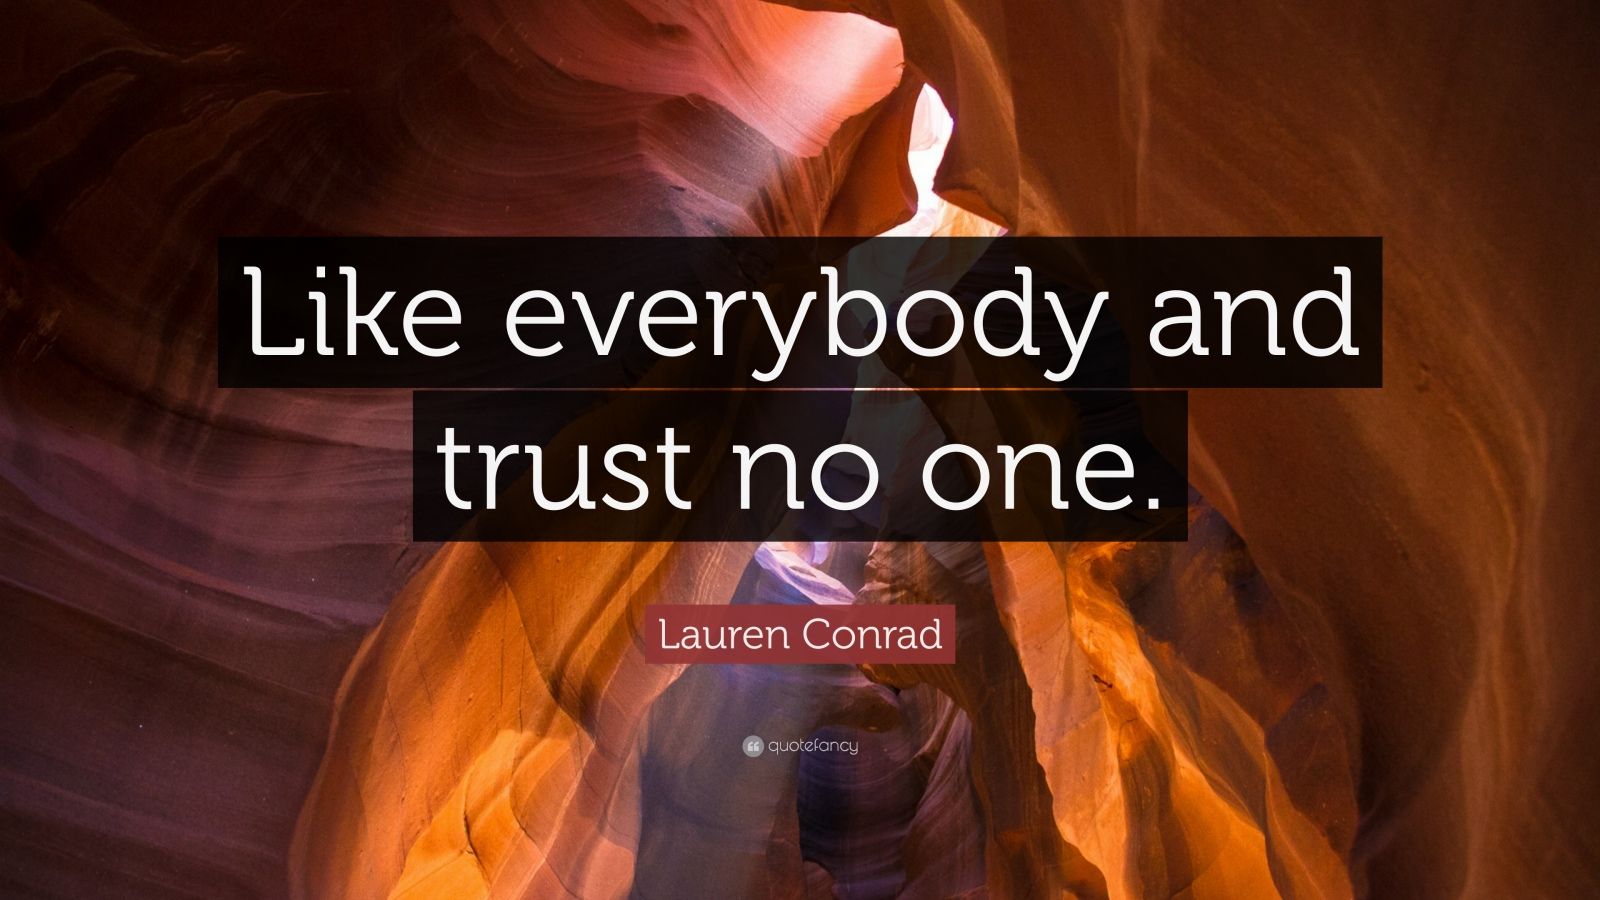 Lauren Conrad Quote: “Like everybody and trust no one.” (9 wallpapers ...